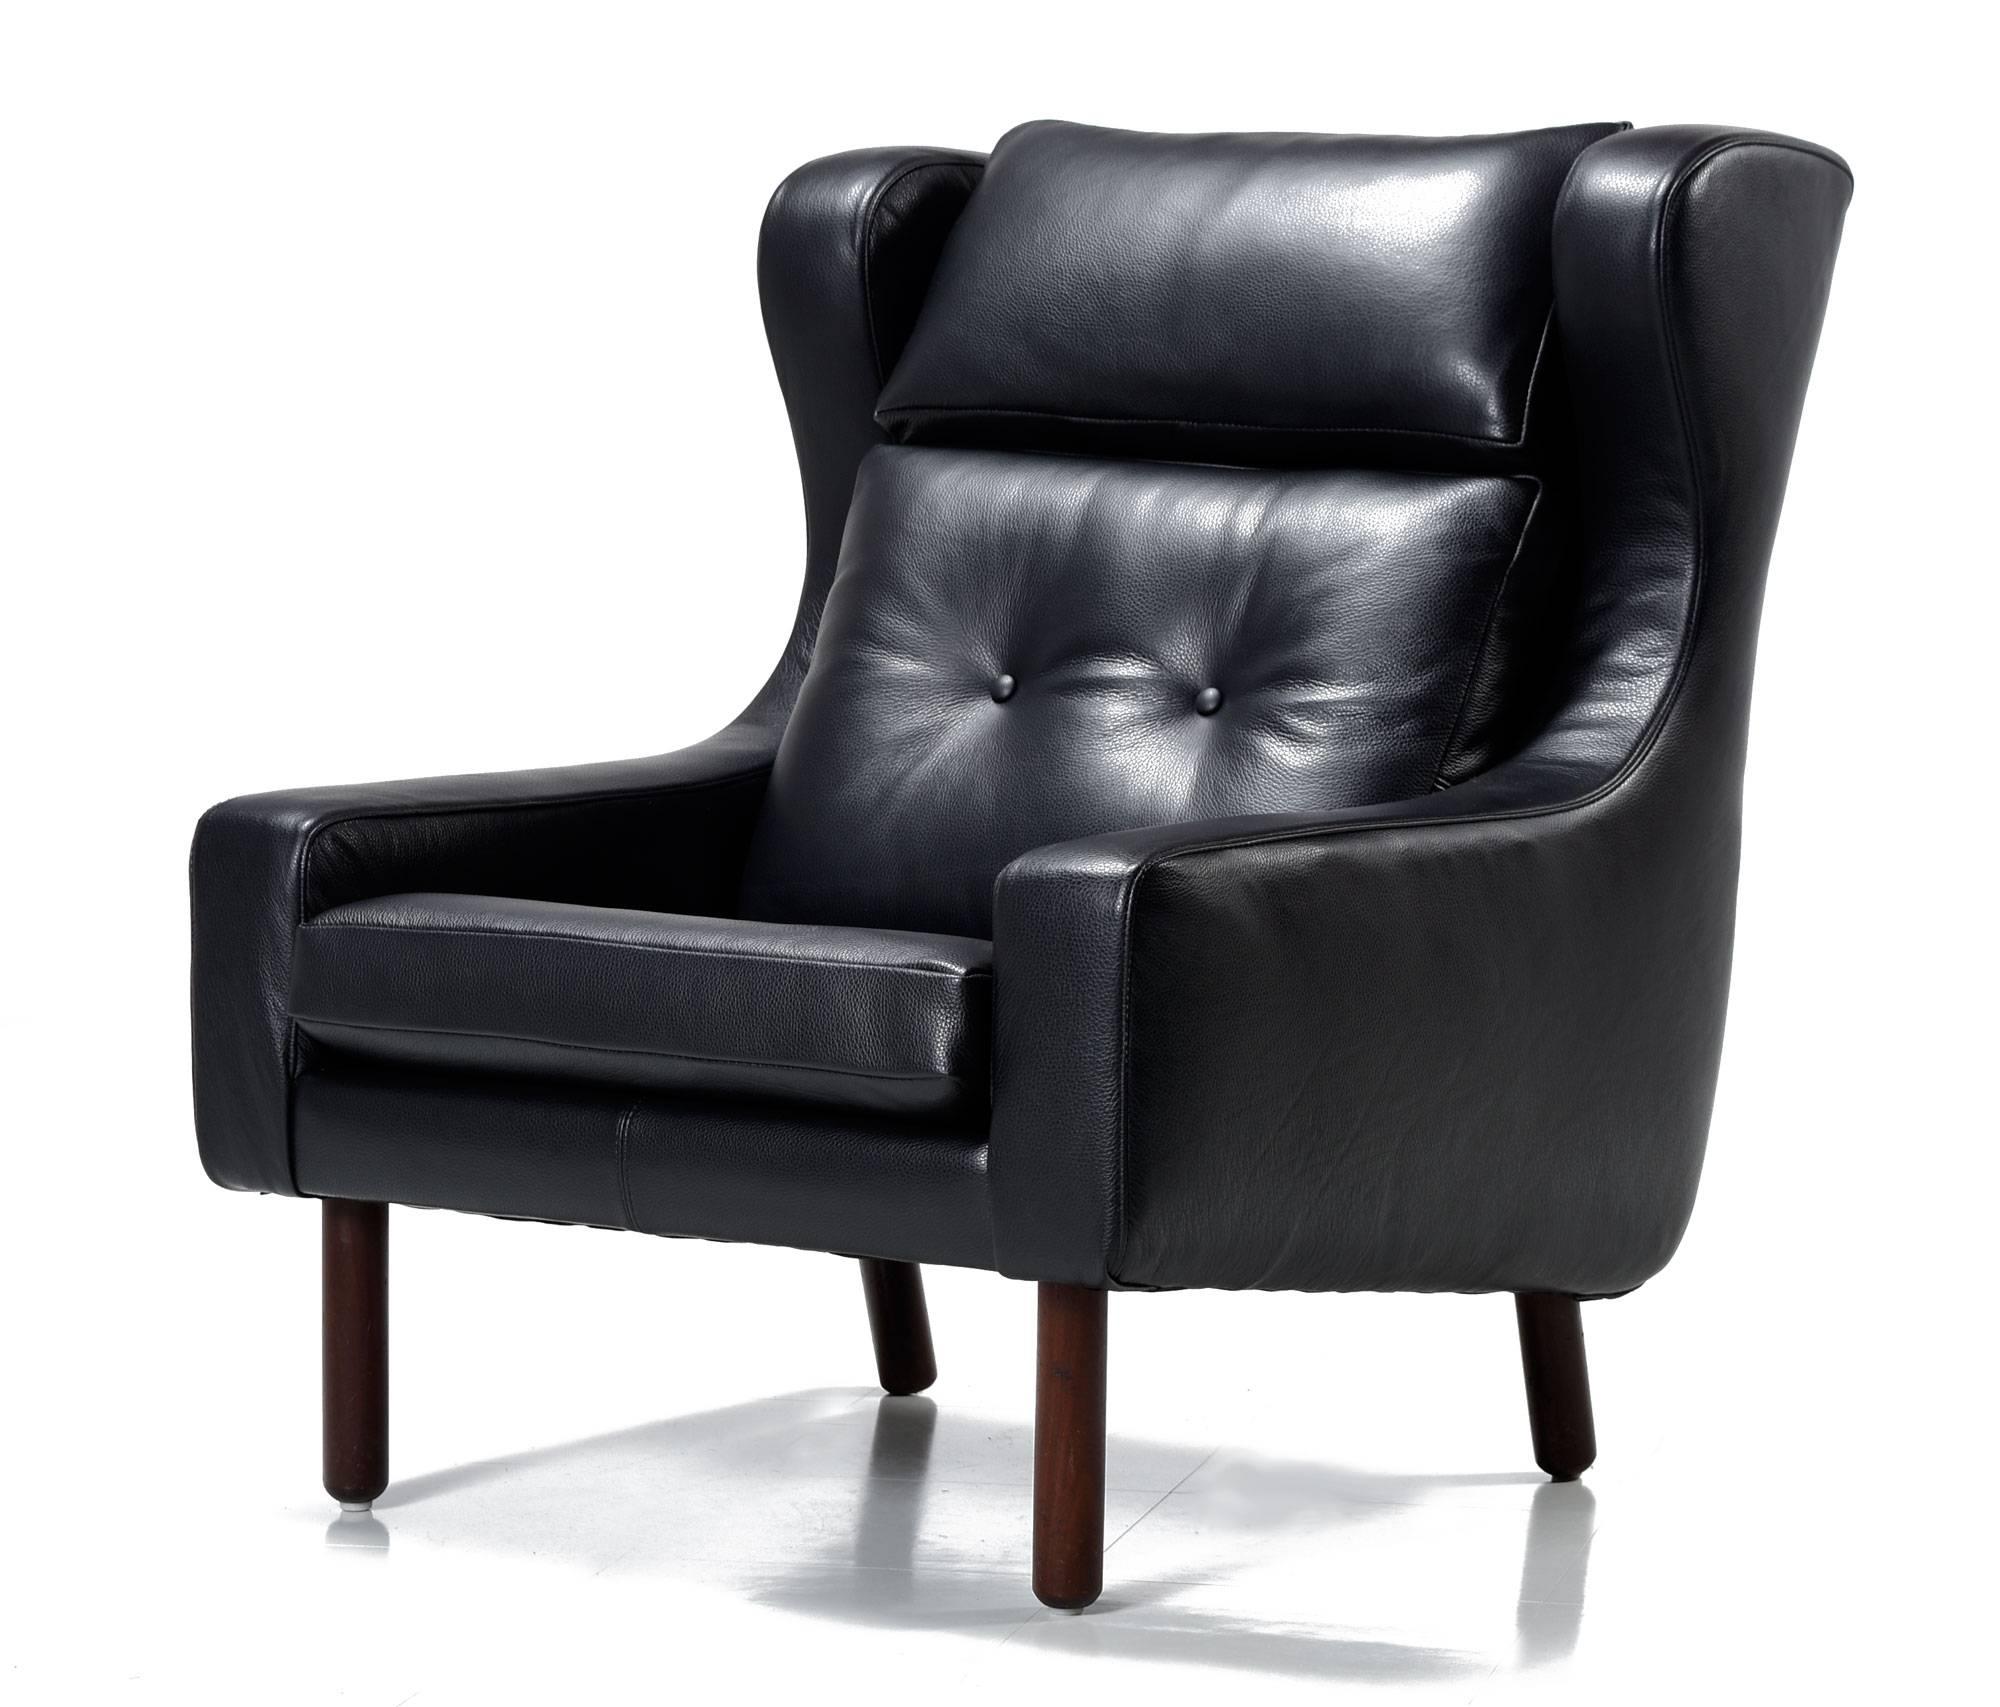 Luxurious pair of black leather Mid-Century Modern 'His & Her' armchairs. These chairs had no marking, but they are clearly in the style of Frits Henningsen and Svend Skipper, made in the 1960s. The larger chair has a wingback style, high back and